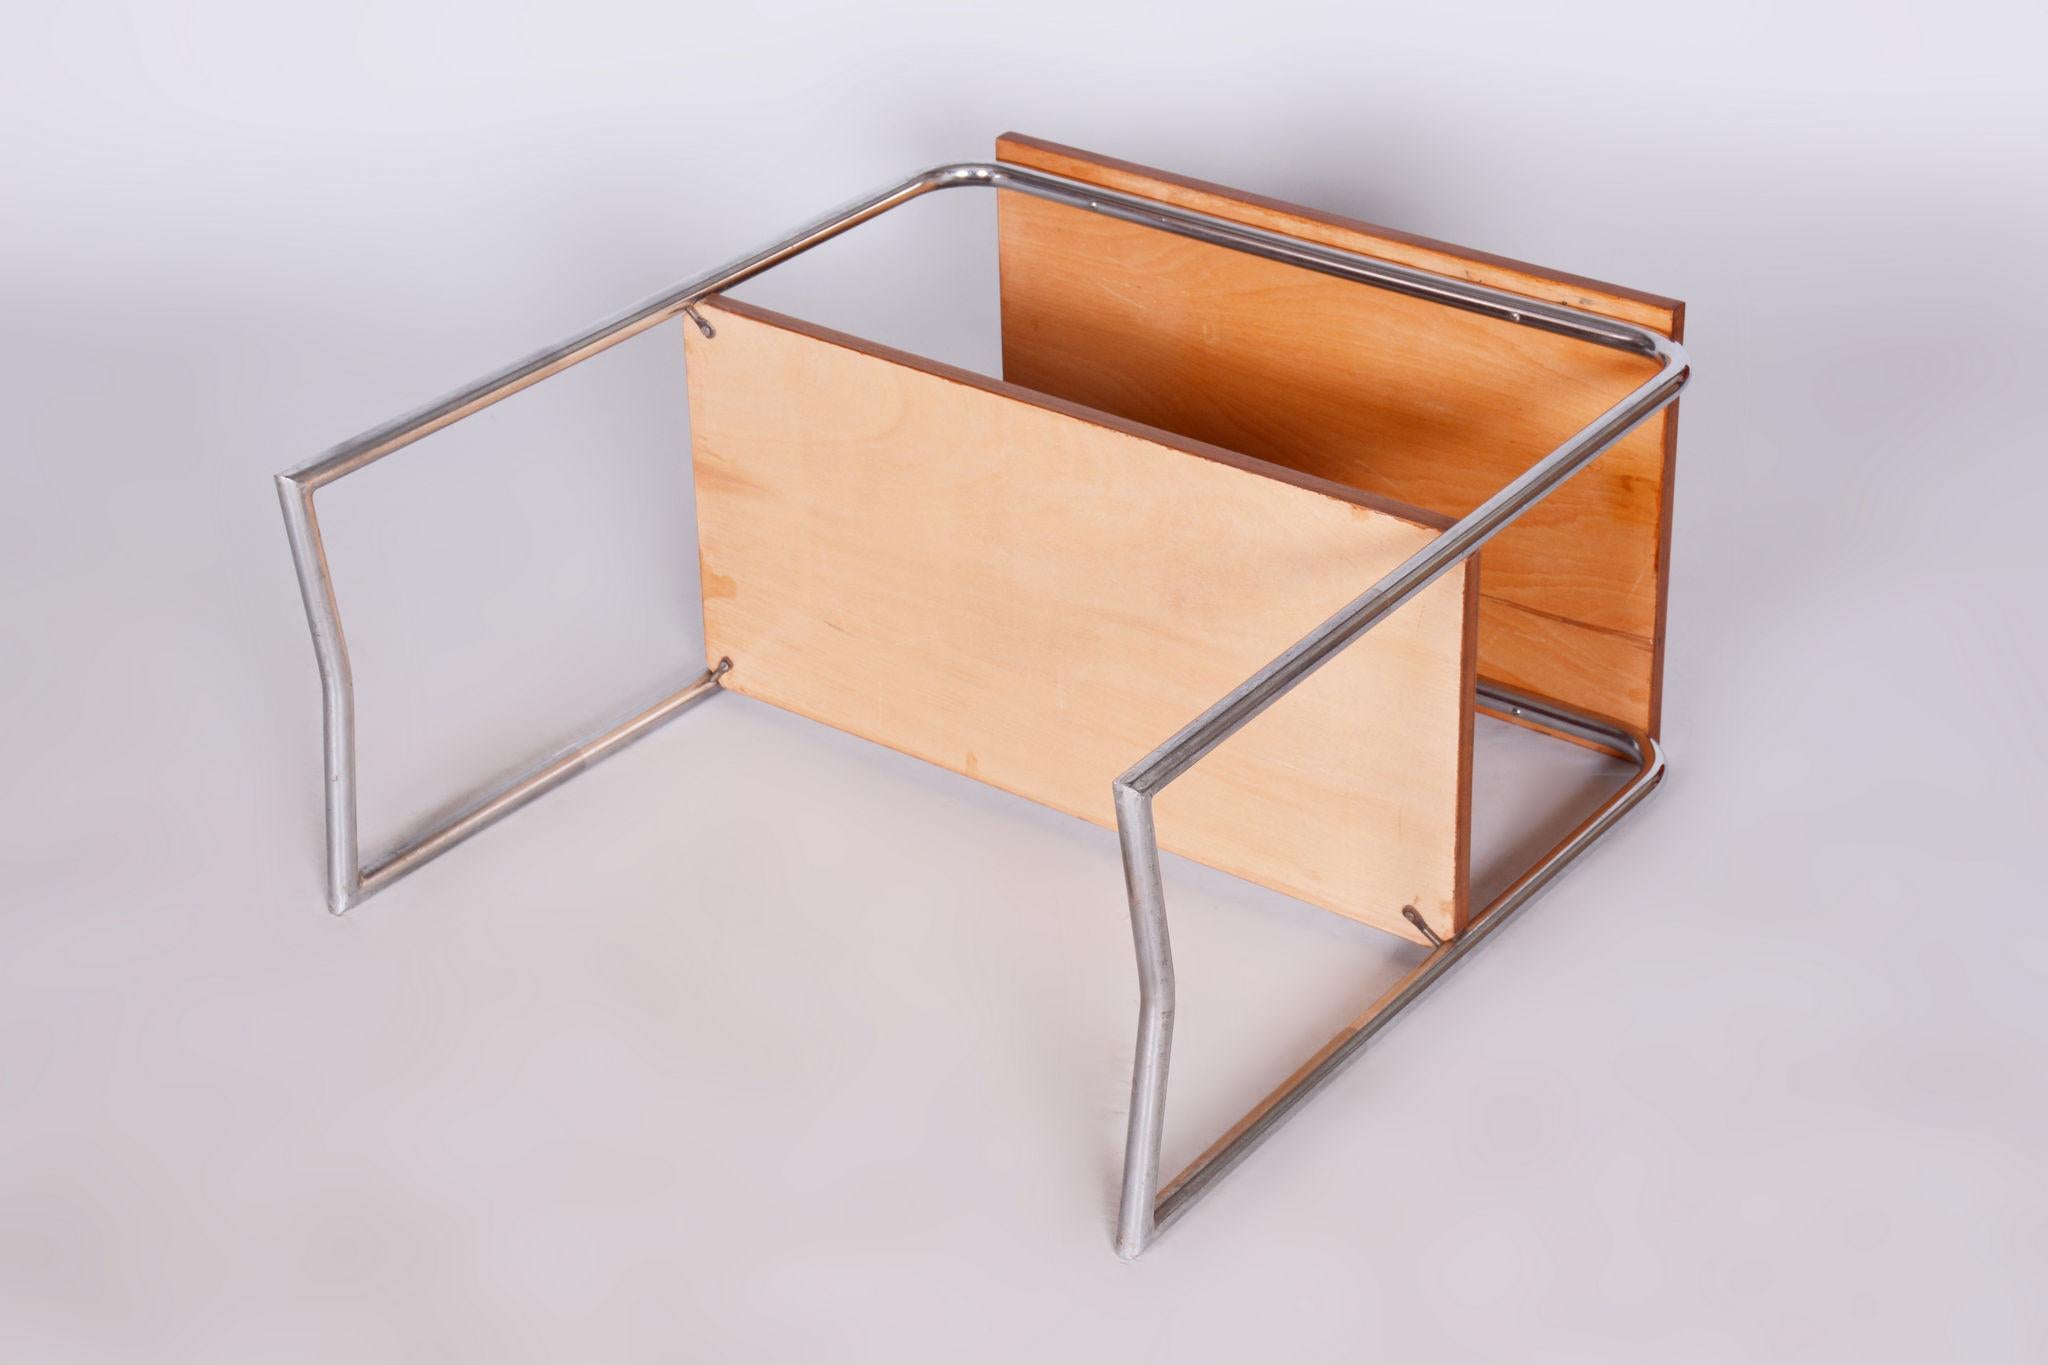 Restored Bauhaus Side Table by Hynek Gottwald

Period: 1930-1939
Maker: Hynek Gottwald
Source: Czechia (Czechoslovakia)
Material: Walnut, Chrome-Plated Steel
Revived polish

Made by Hynek Gottwald, a company credited with being the pioneers of metal